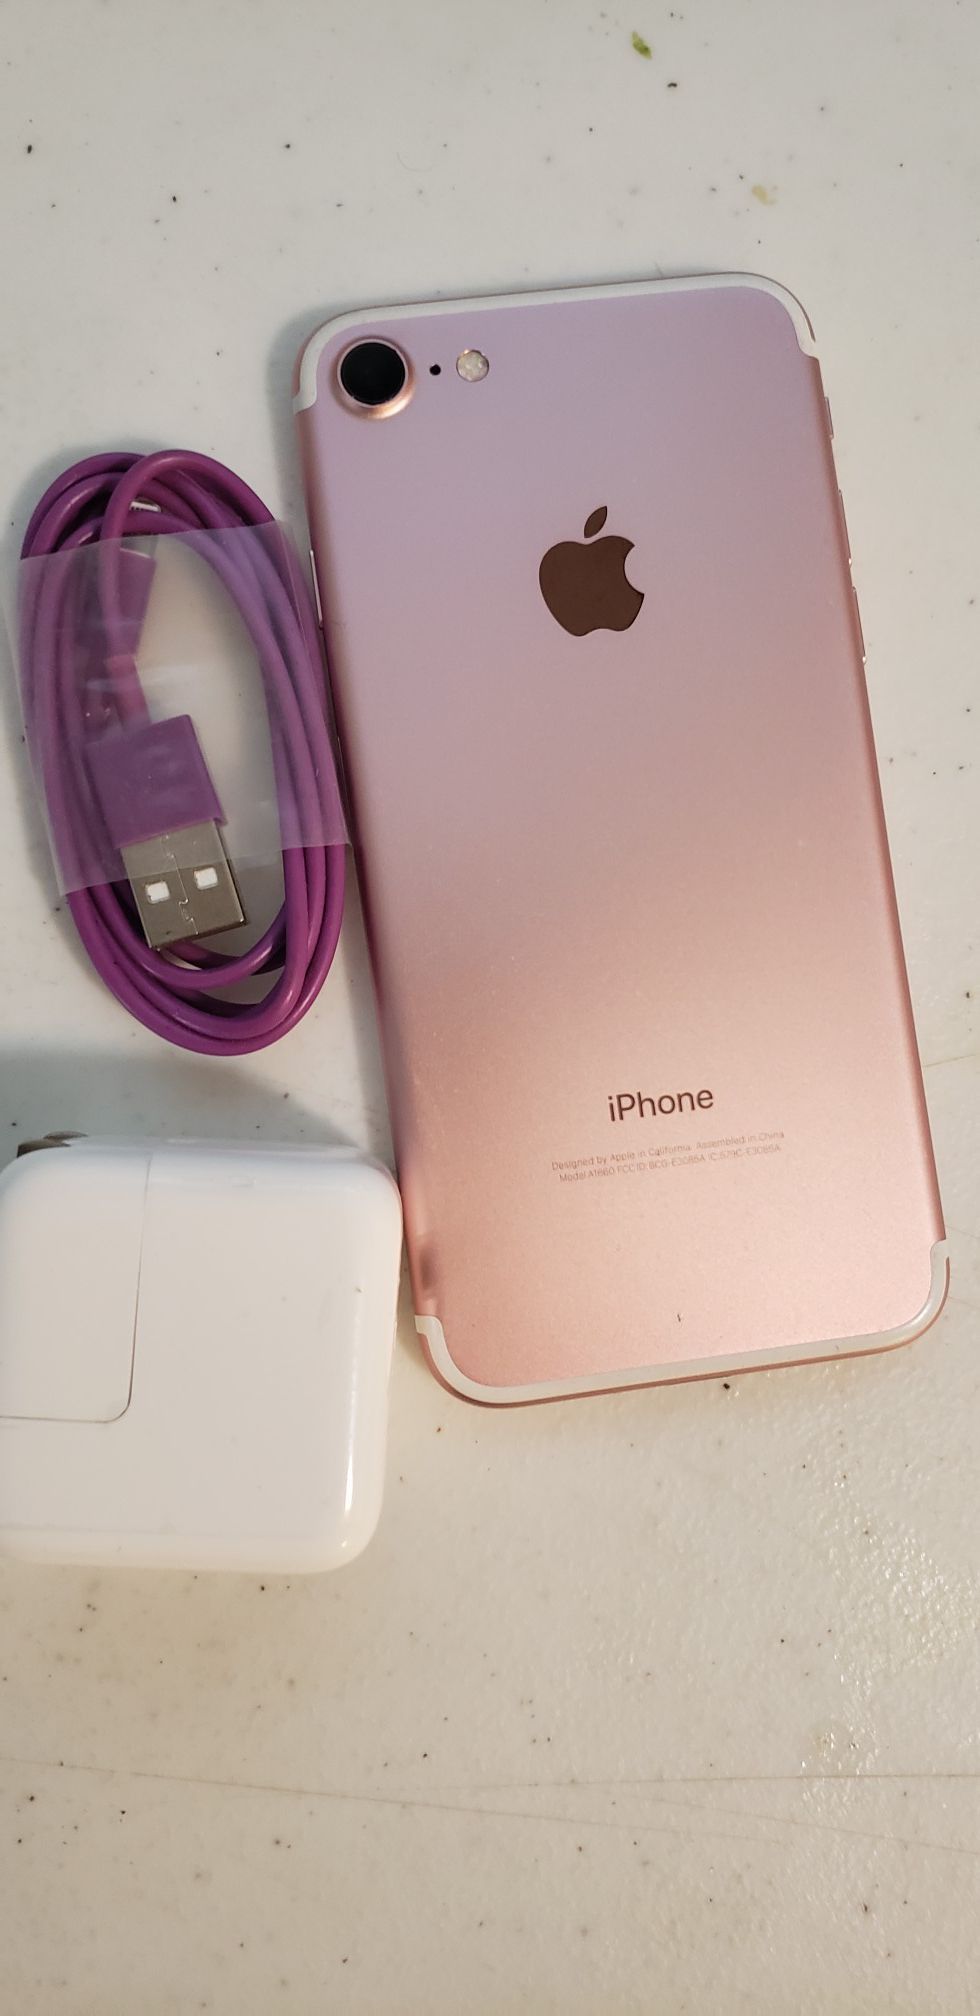 APPLE IPHONE 7 128 GB UNLOCKED. COLOR GOLD ROSE. WORK VERY WELL. INCLUDED CHARGER. PERFECT CONDITION.